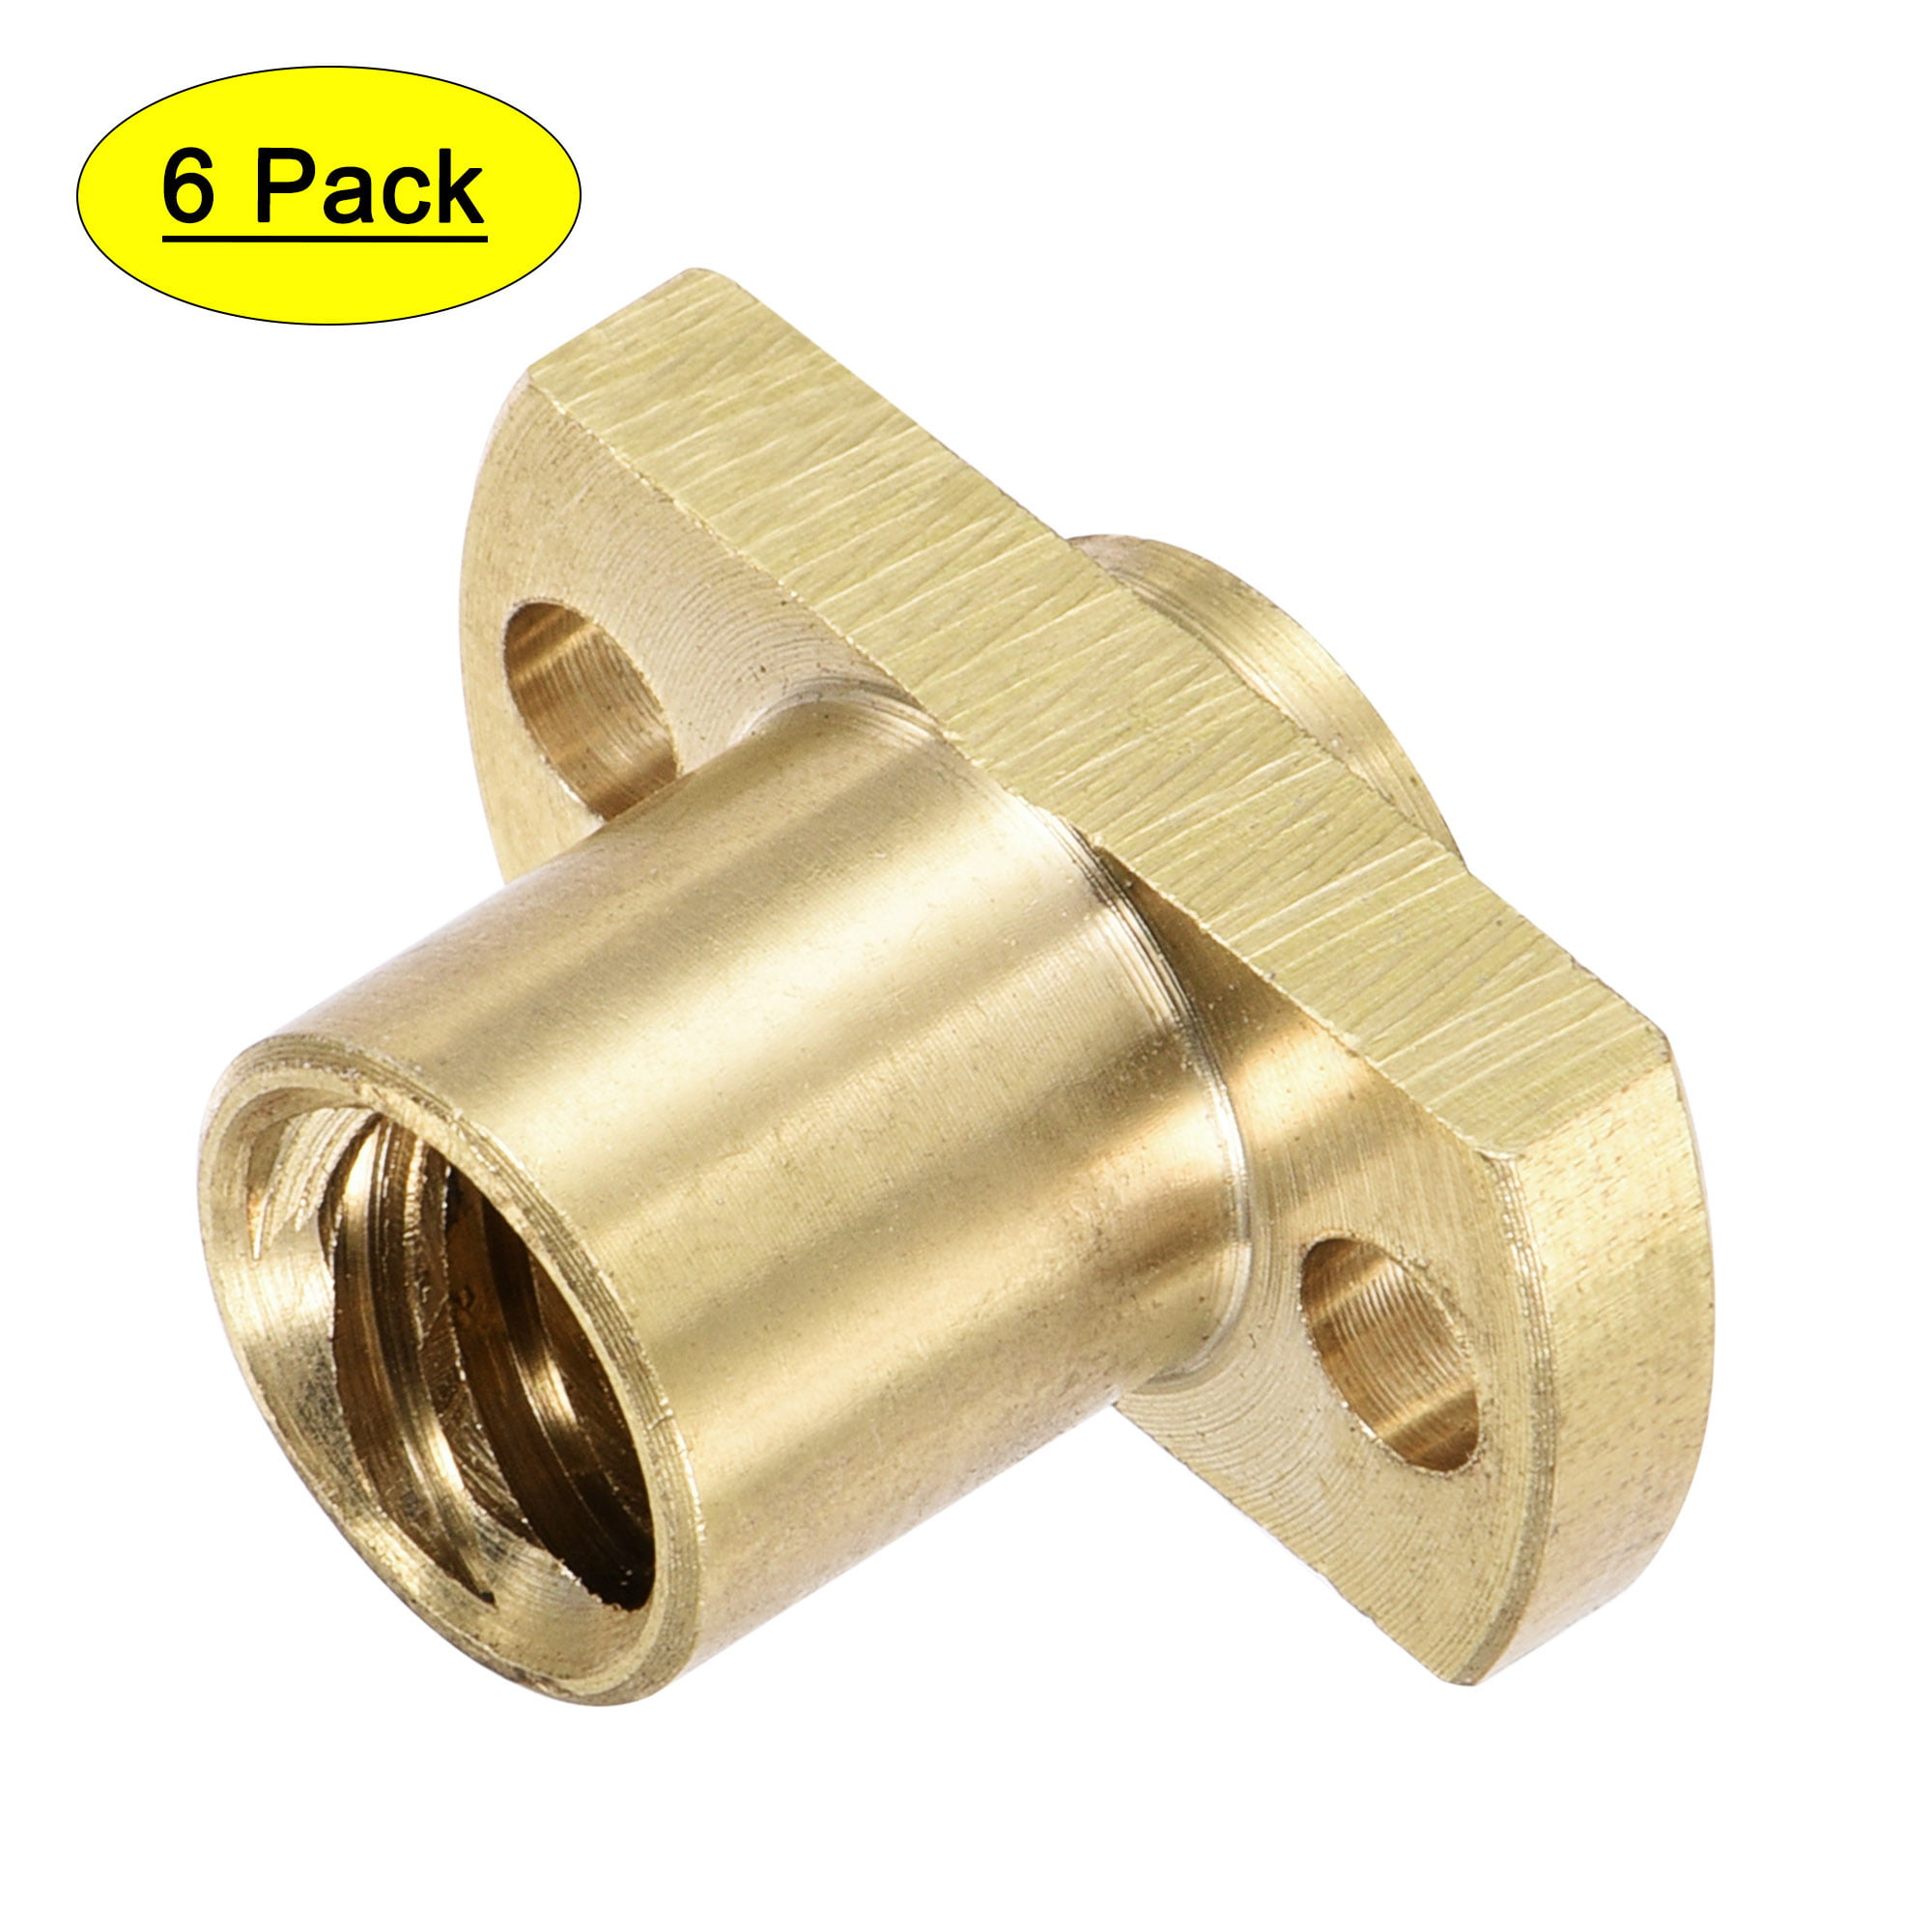 uxcell Knurled Insert Nuts - 50Pcs M4 x 6mm Length x 6.4mm OD Female Thread  Brass Threaded Insert Embedment Nut for 3D Printer